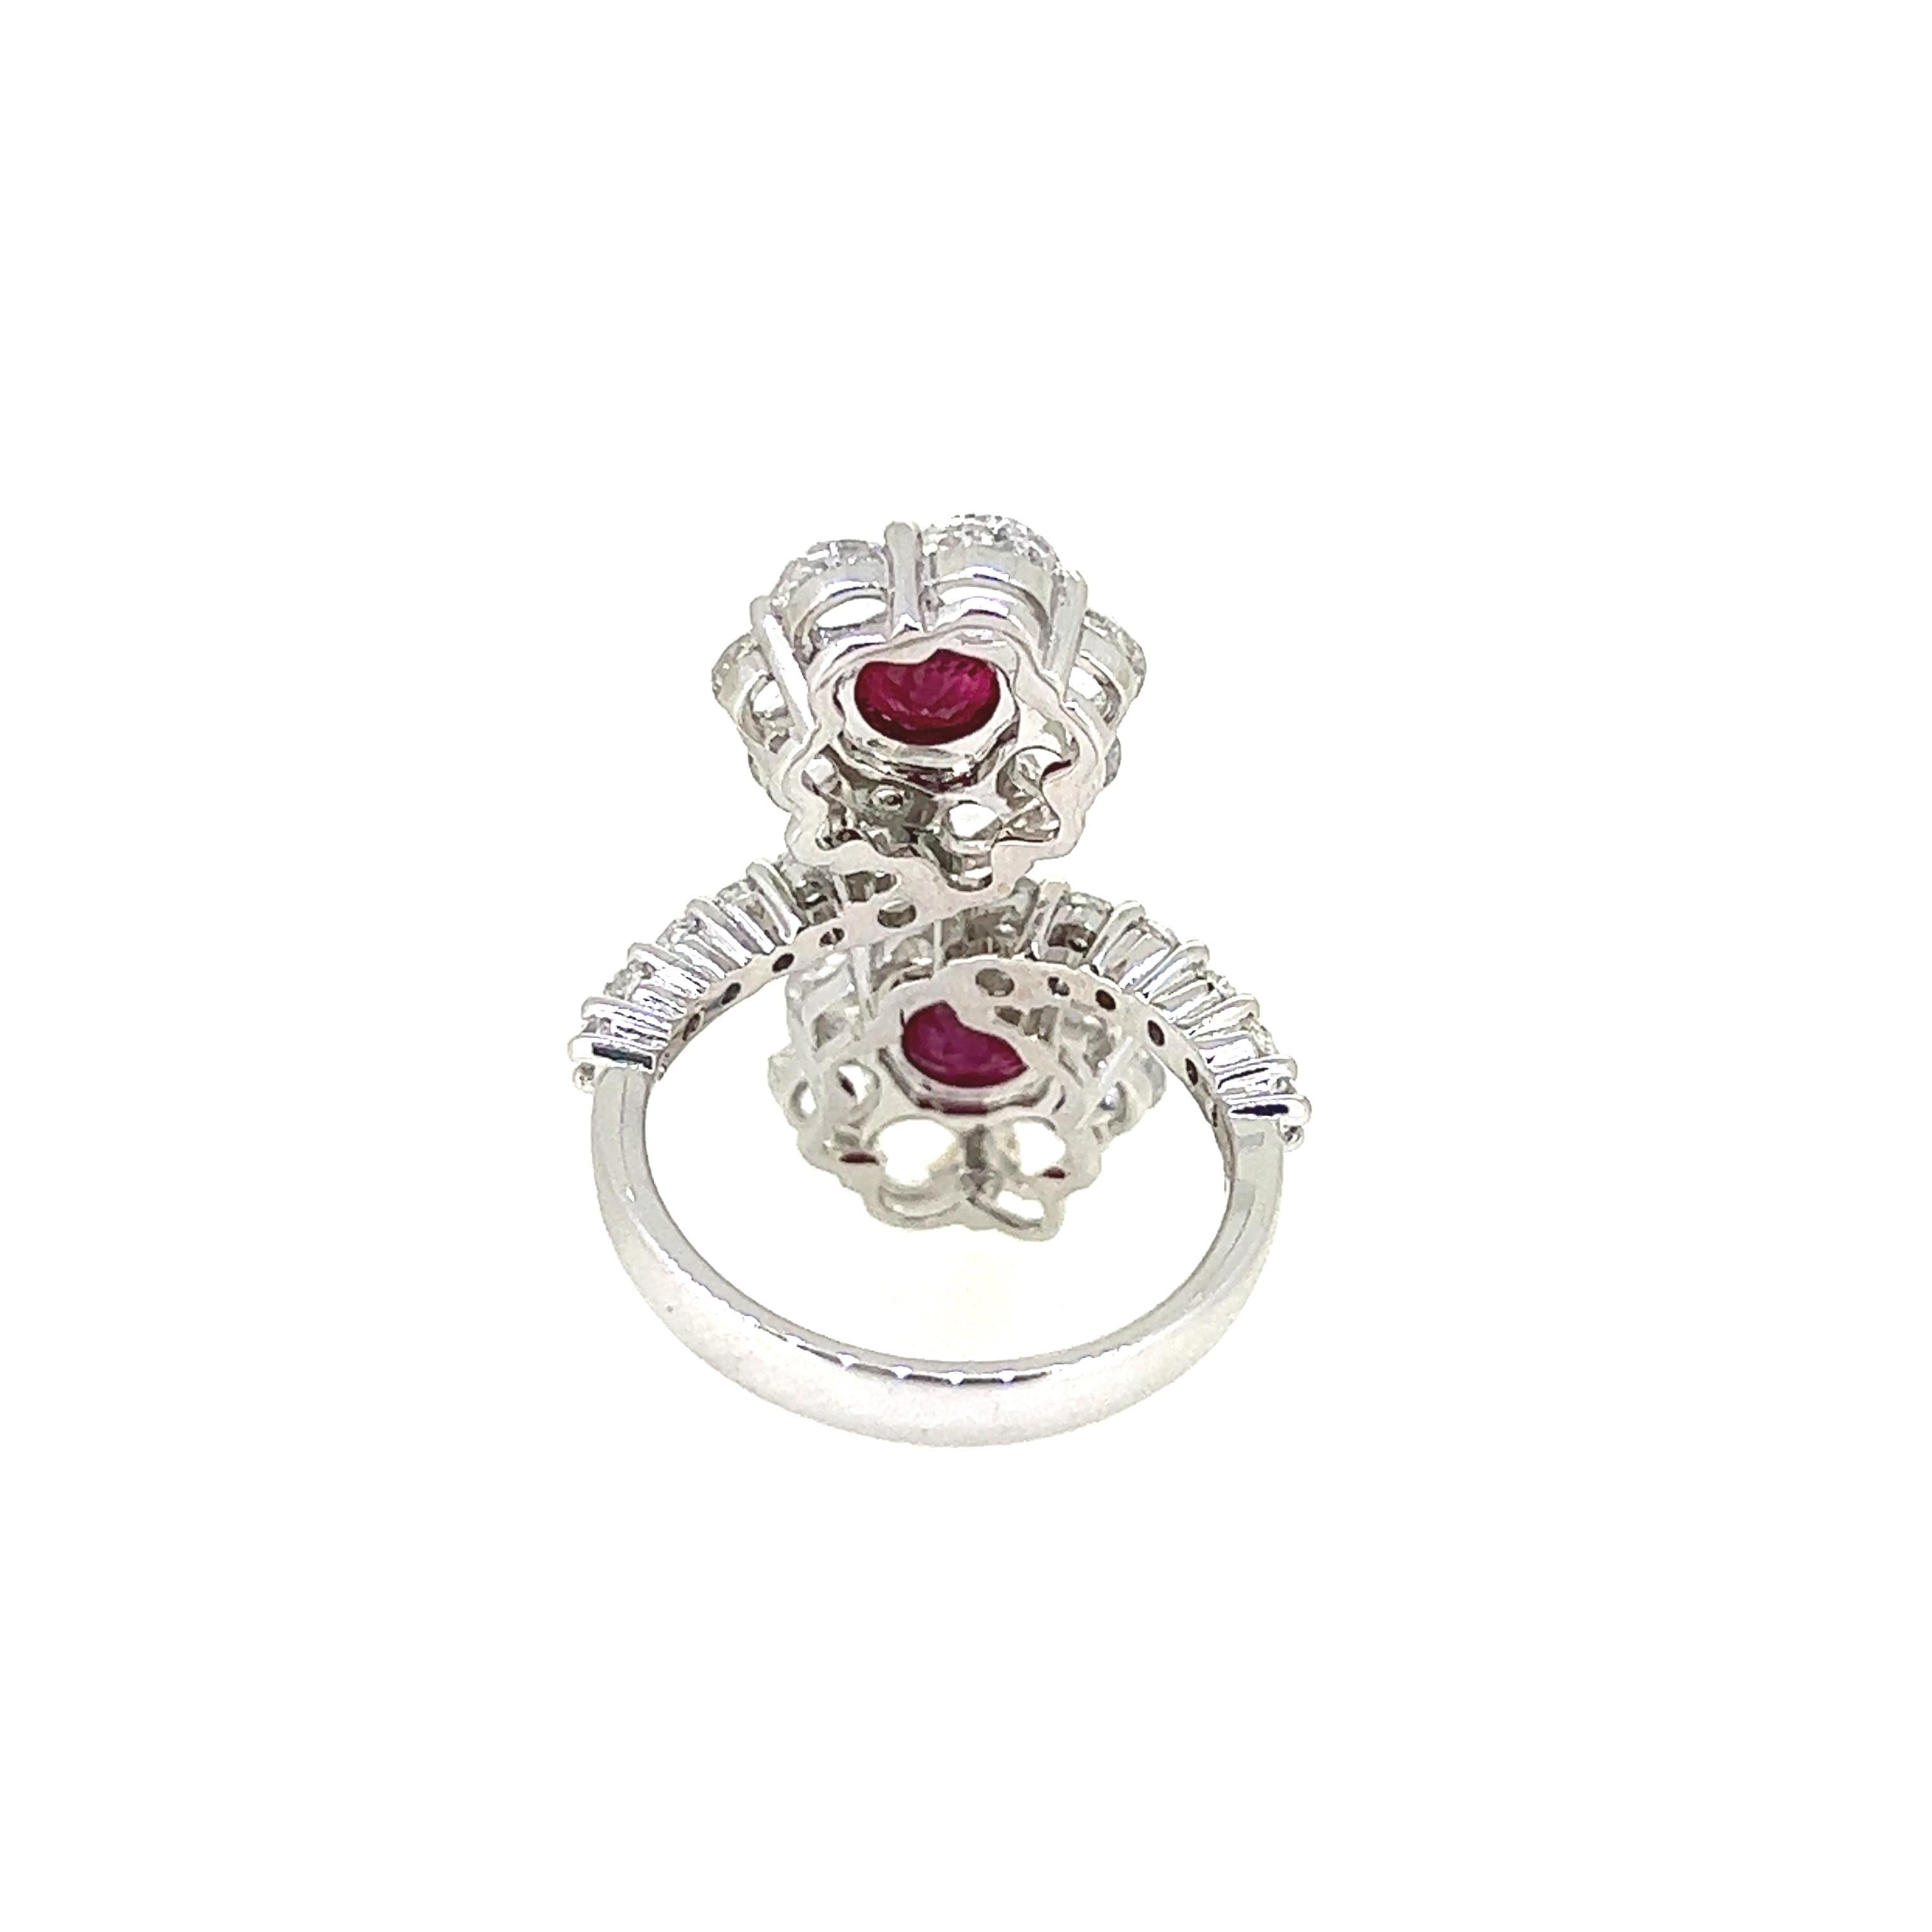 This extraordinary Double Flower Ring boasts sparking pair of Ruby set as center stones weighing 2.48 carats surrounded by 28 Rose cut Diamonds weighing 3.15 carats.  Crafted in 18 Karat White Gold, this beautifully designed ring sparkles with